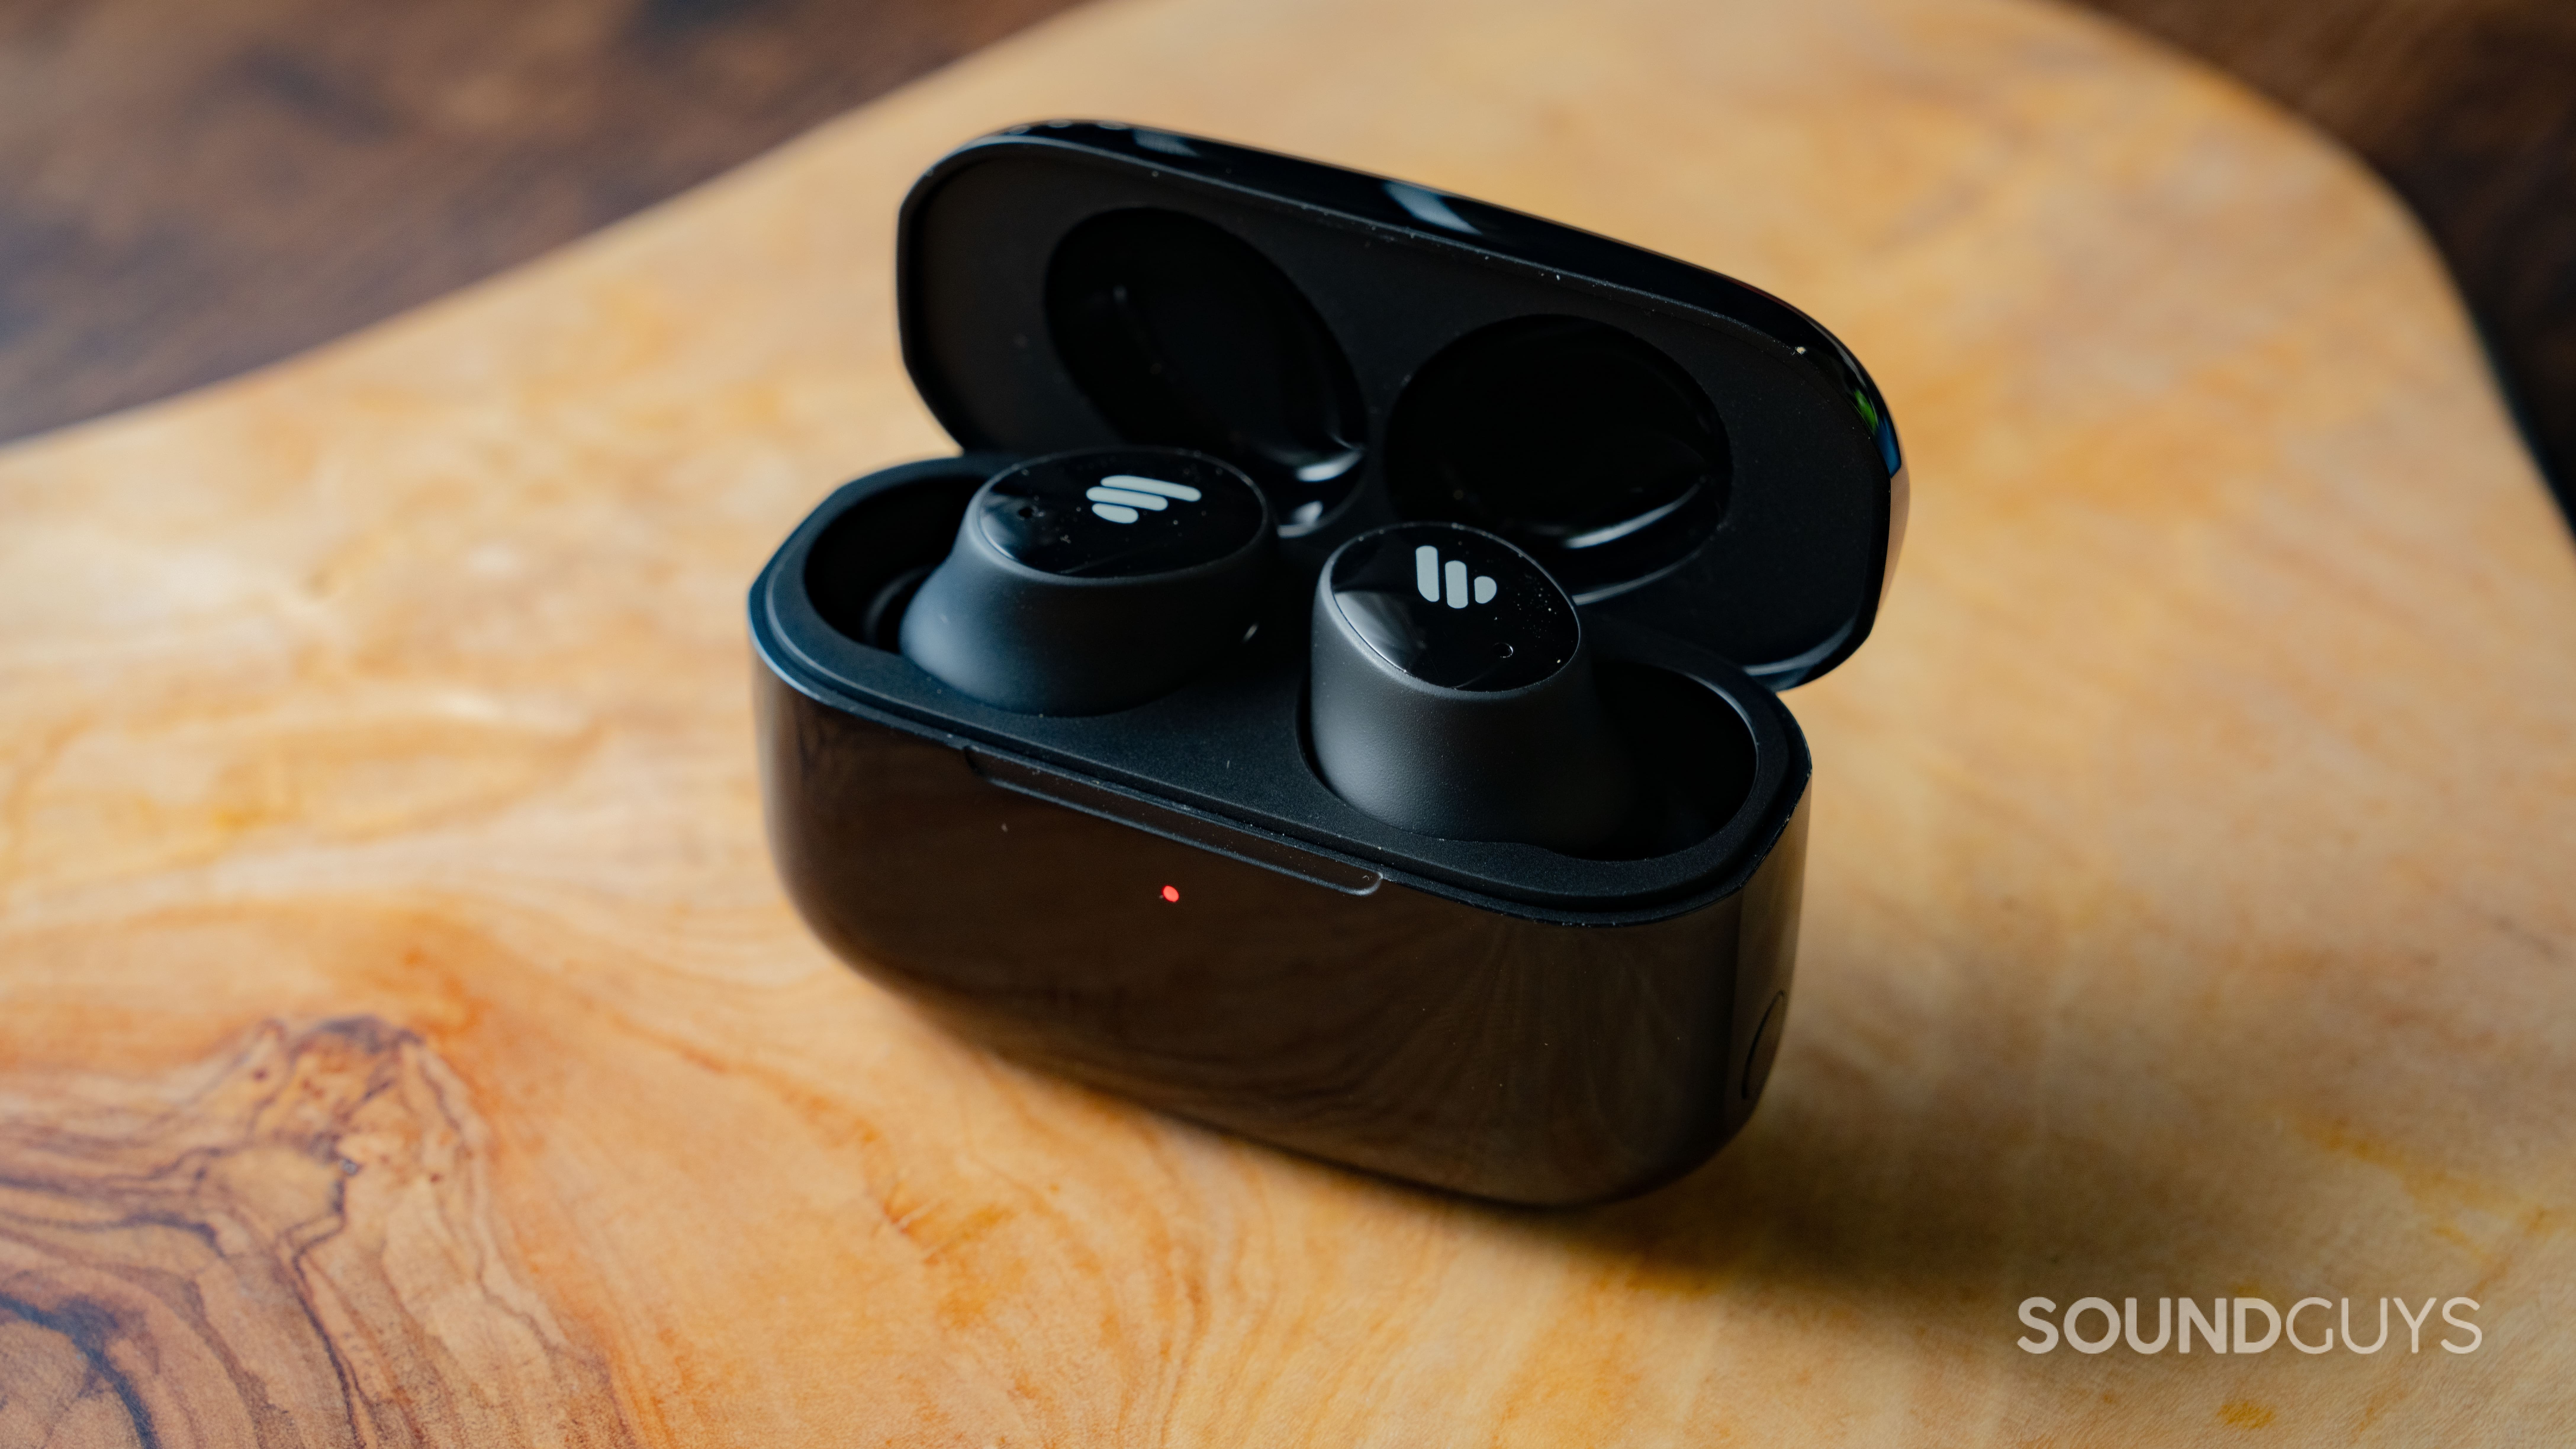 The Edifier TWS1 Pro 2 Earbuds in their charging case with the lid open.